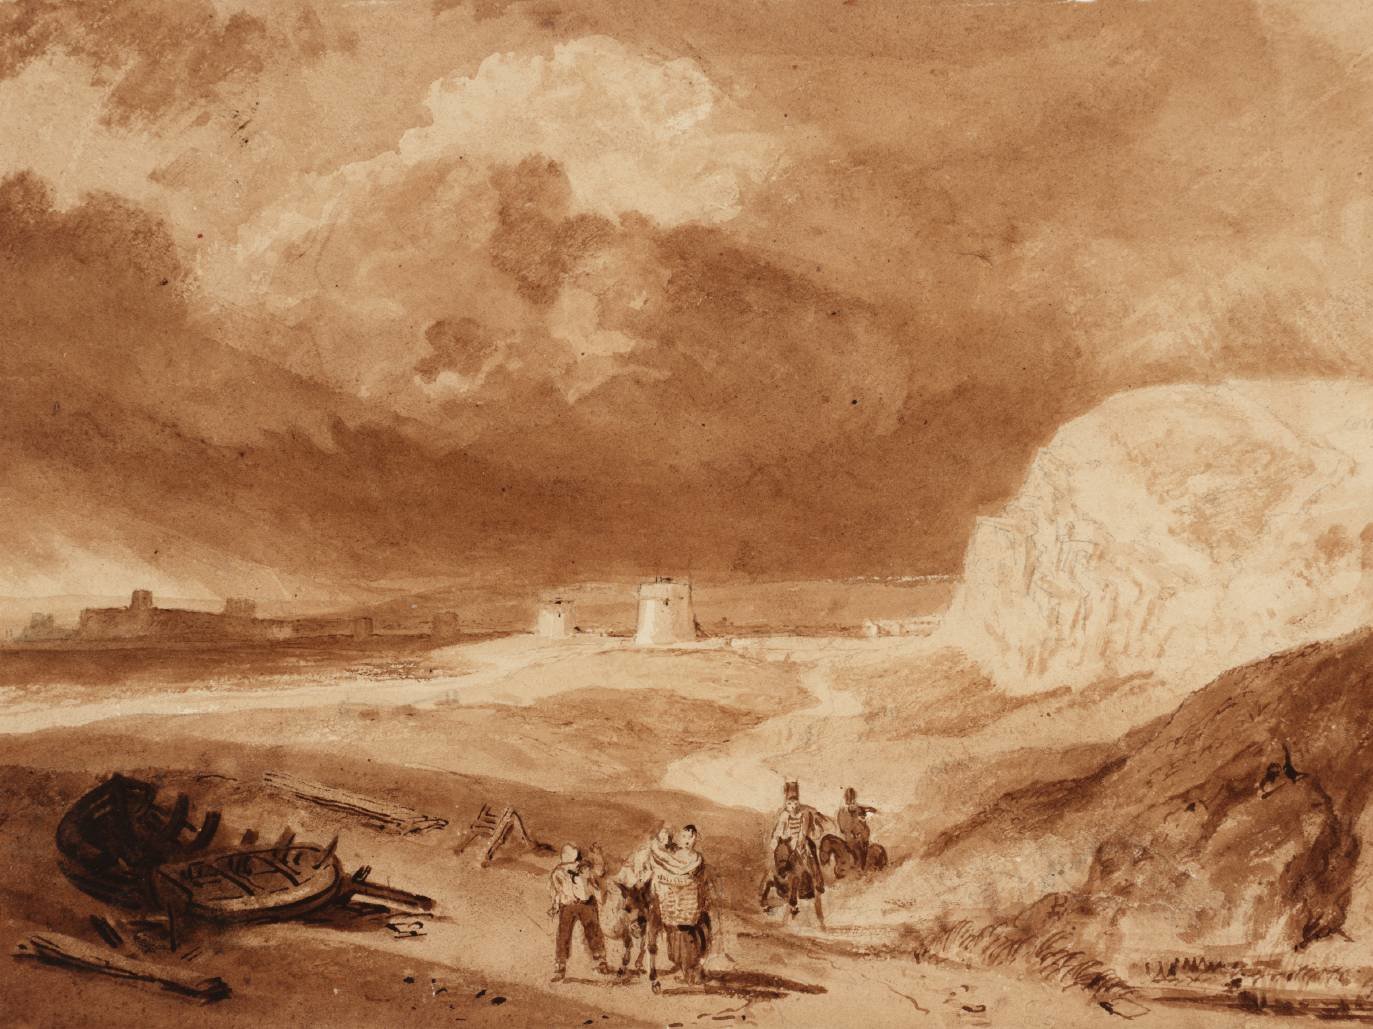 Etching and mezzotint image of Martello Towers near Bexhill, with a  small group of people in the foreground, and two soldiers on horseback riding up the road in the centre of the image